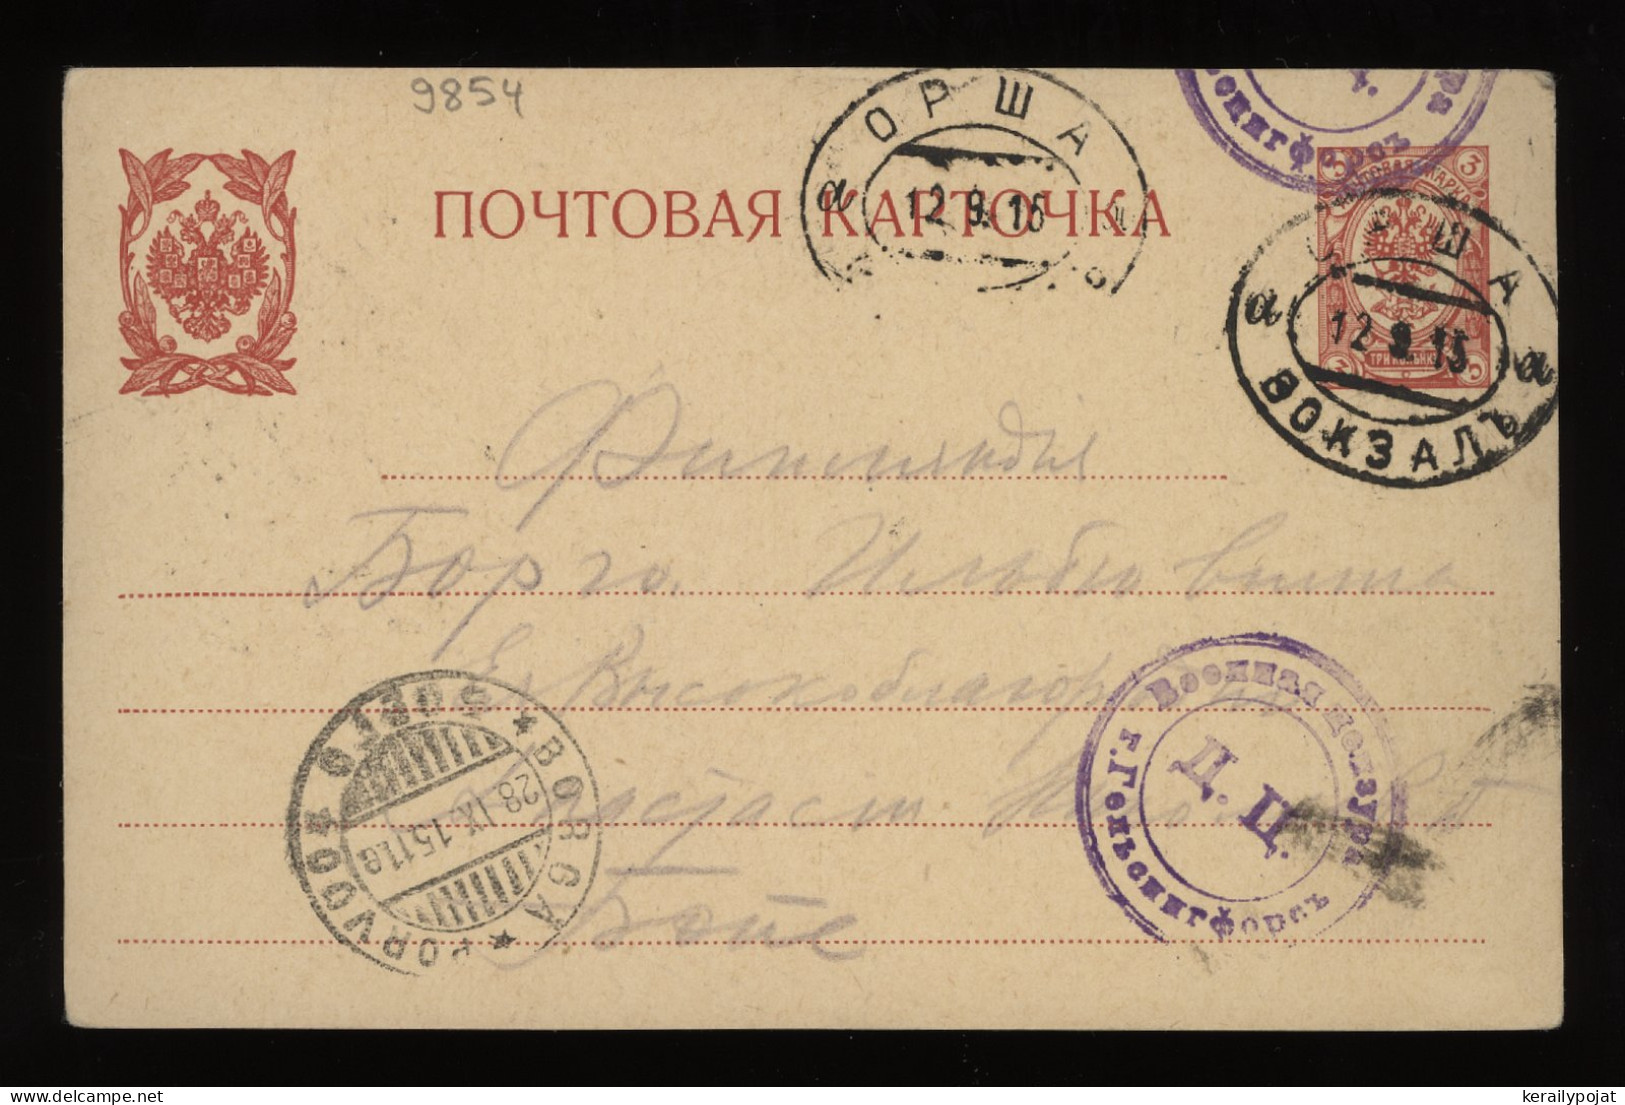 Russia 1915 3k Red Stationery Card To Finland__(9854) - Stamped Stationery